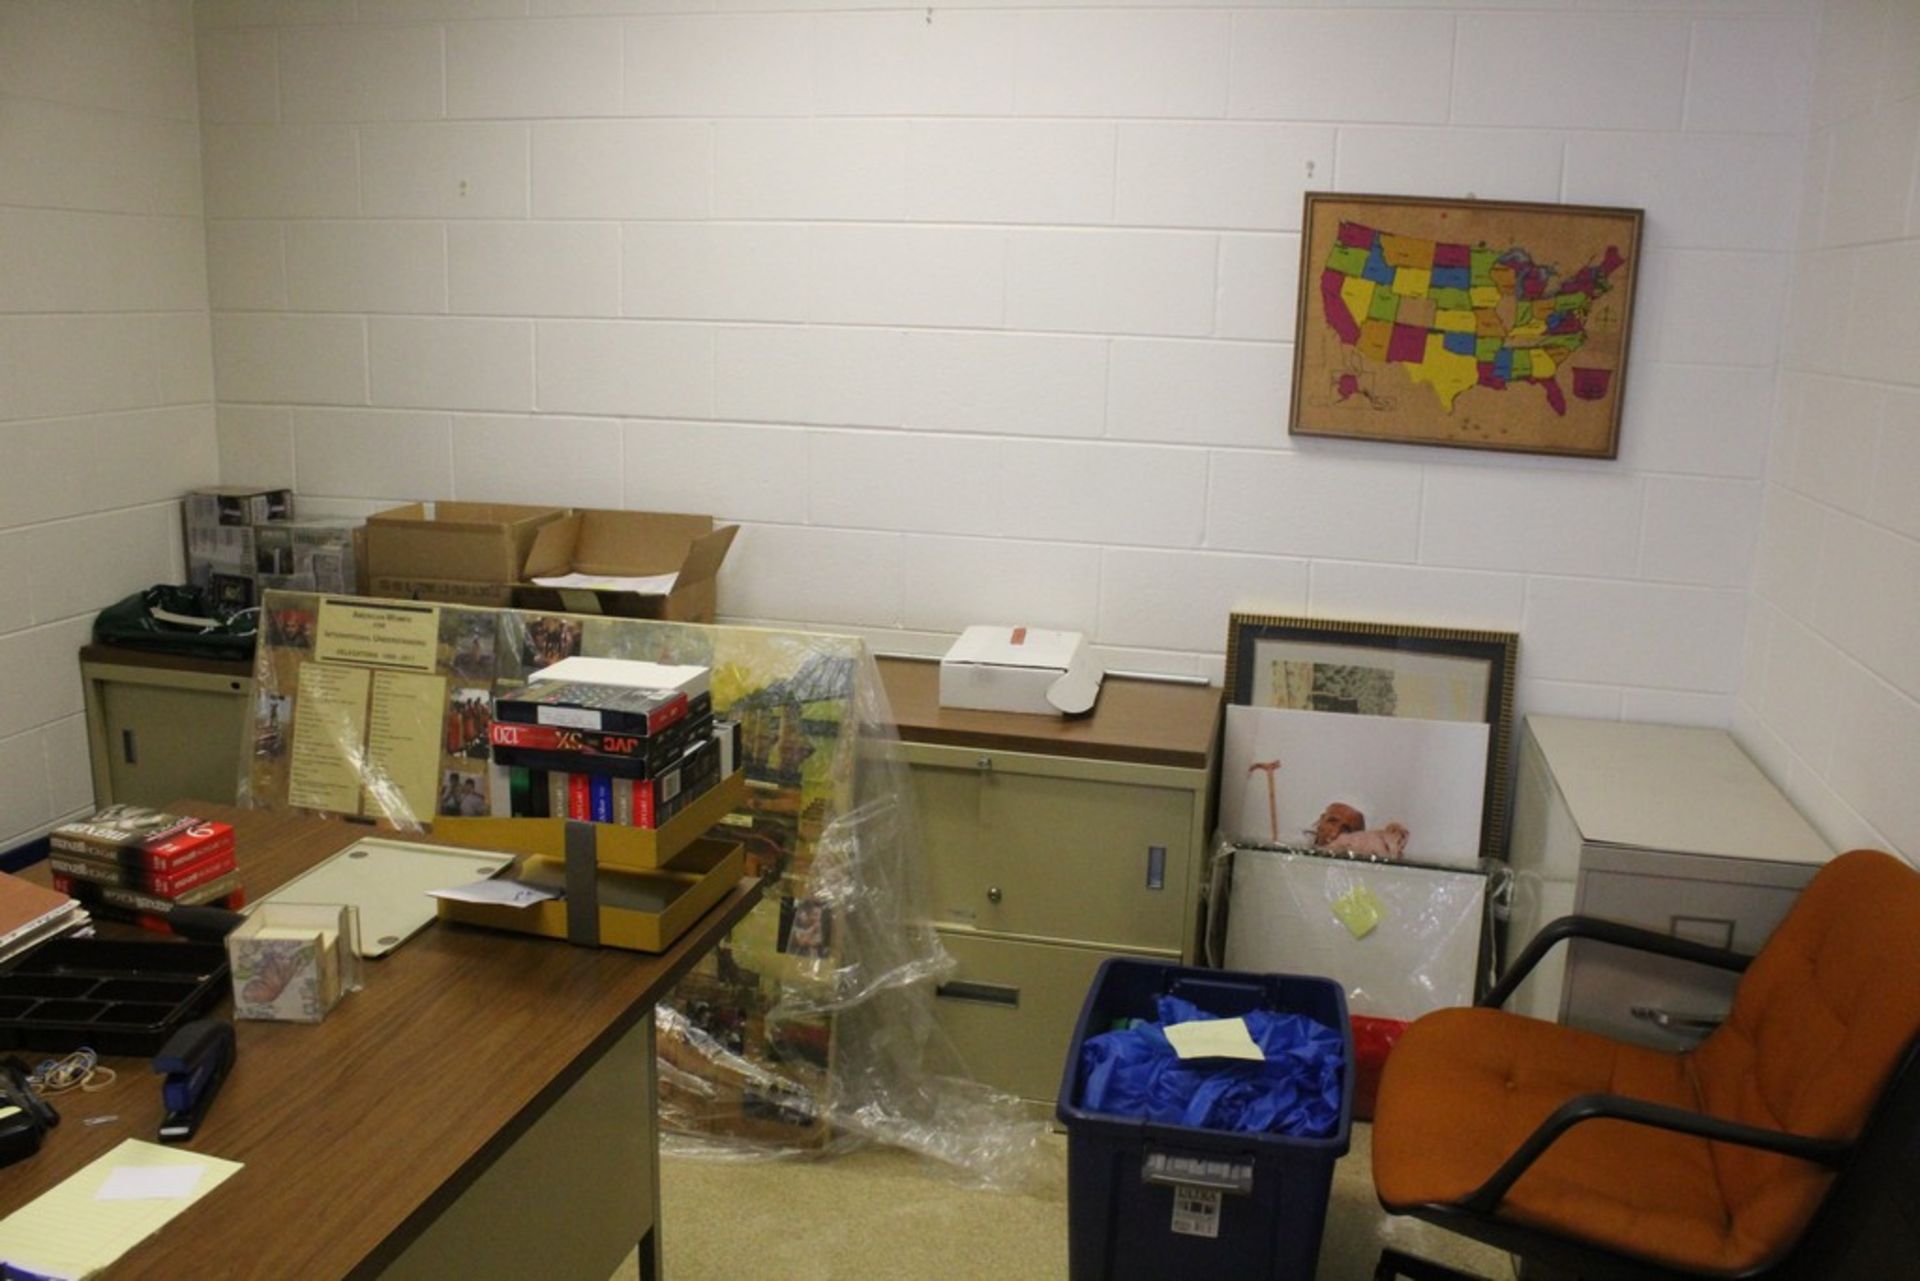 OFFICE DESKS, TABLES, CHAIRS IN ROOM - Image 2 of 2